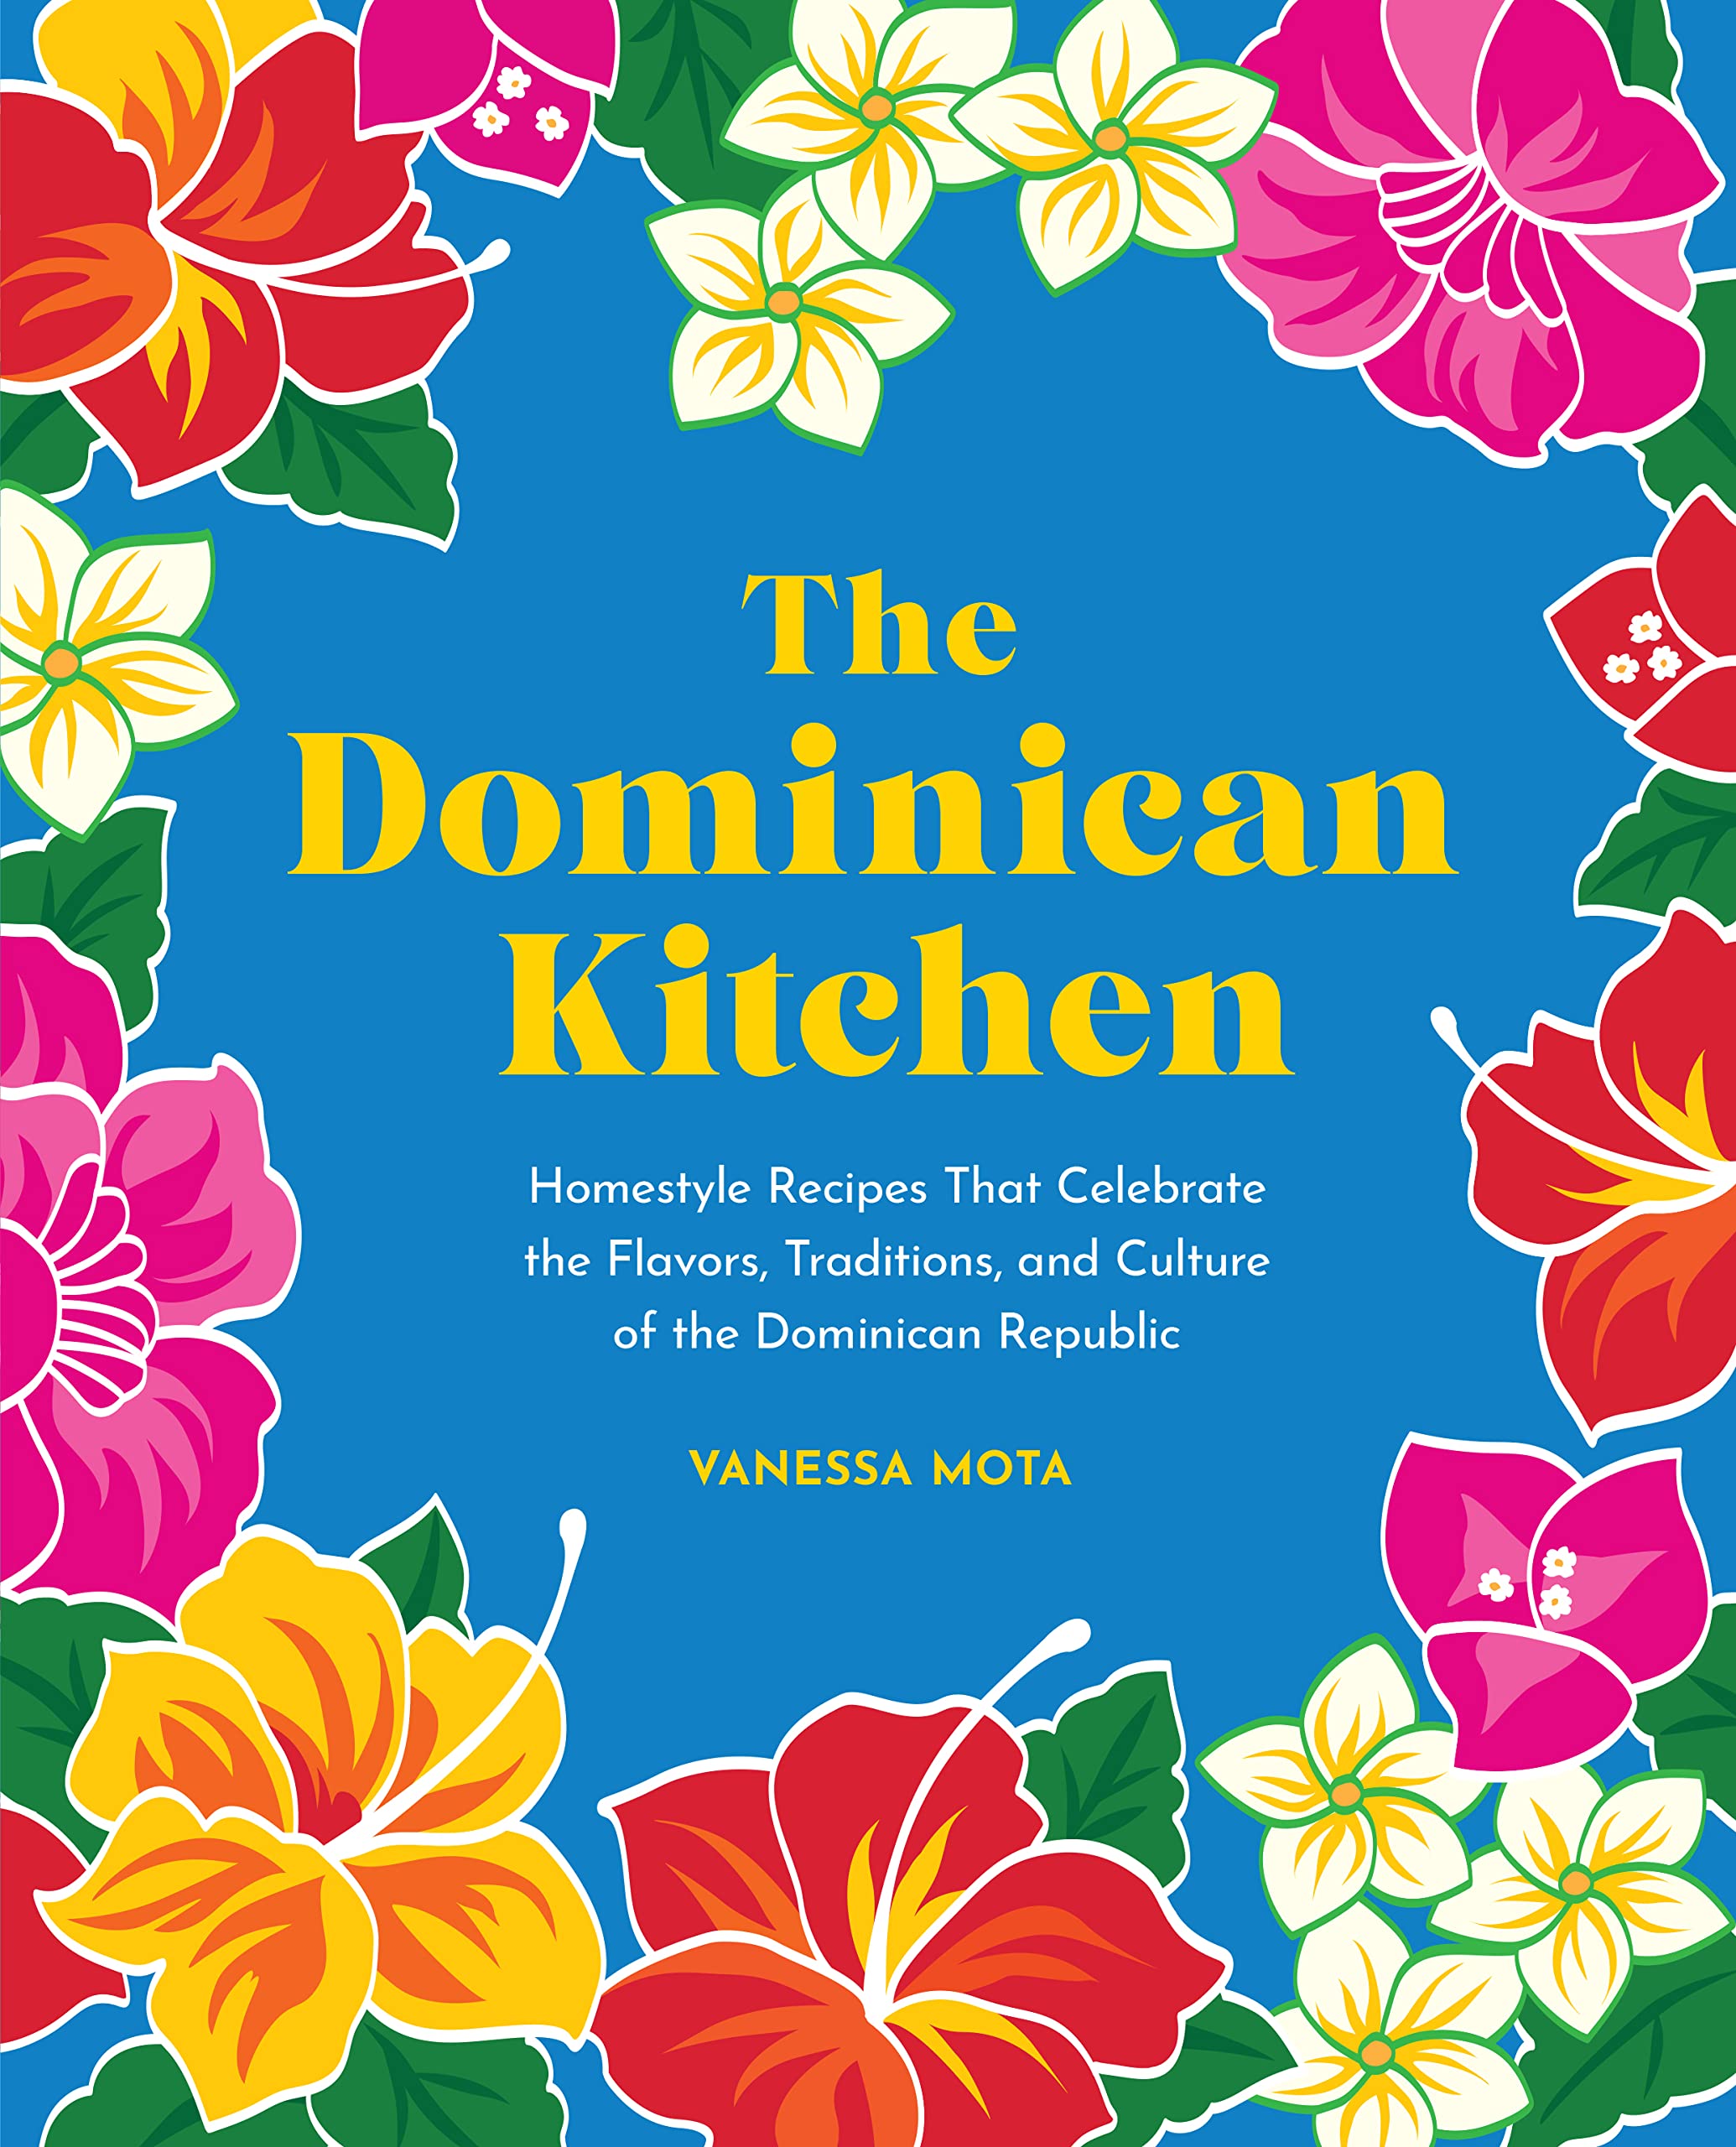 The Dominican Kitchen: Homestyle Recipes That Celebrate the Flavors, Traditions, and Culture of the Dominican Republic (Vanessa Mota)